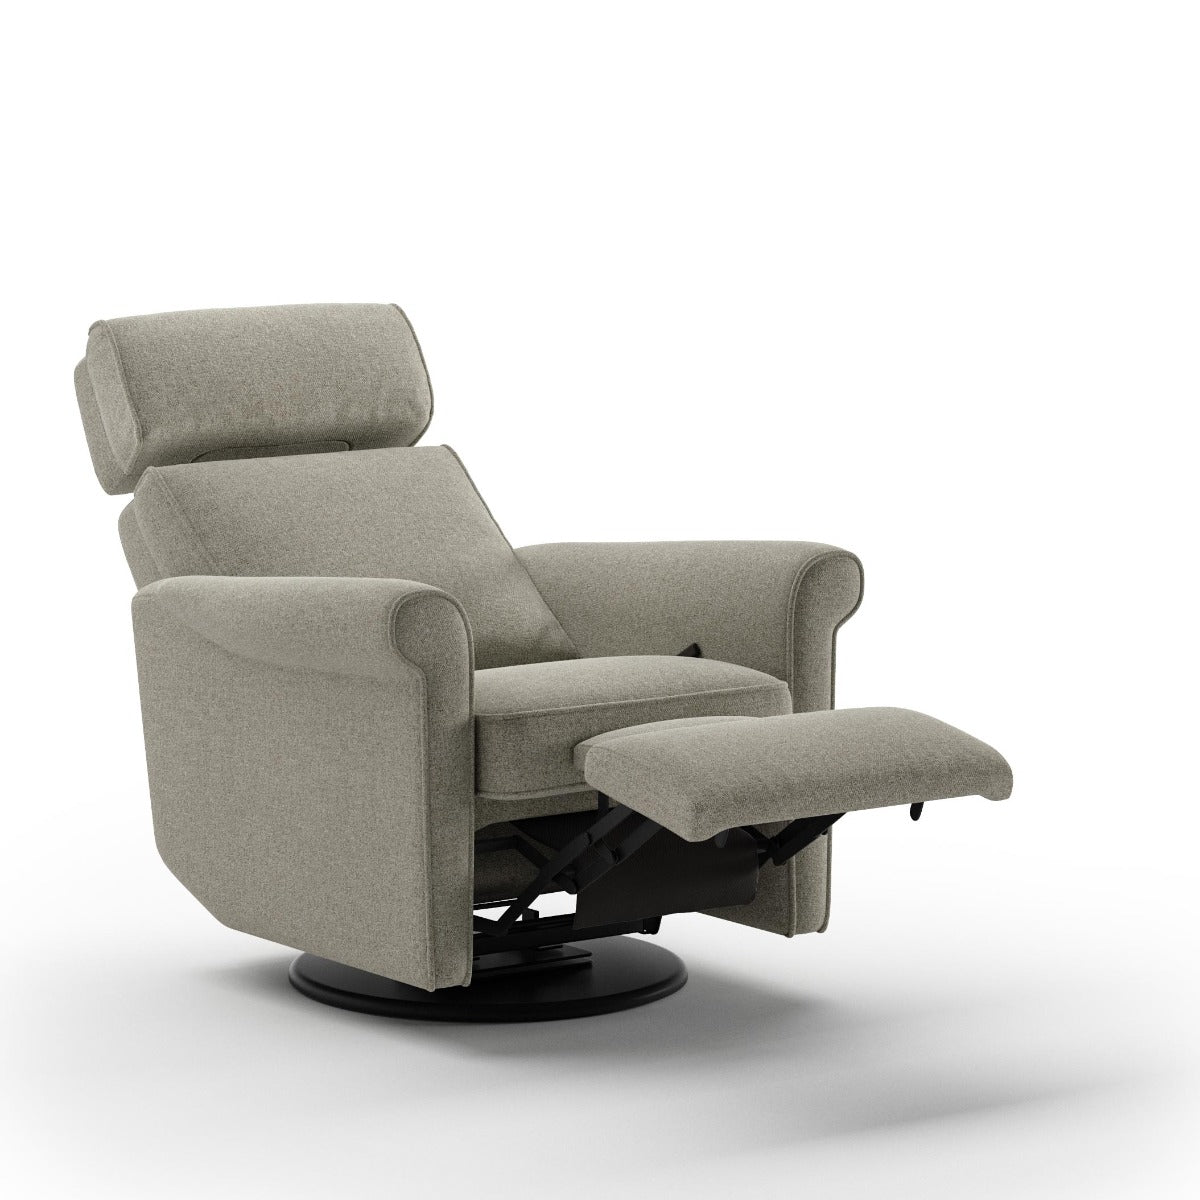 Luonto Furniture Rolled Recliner - Manual - Rene 03